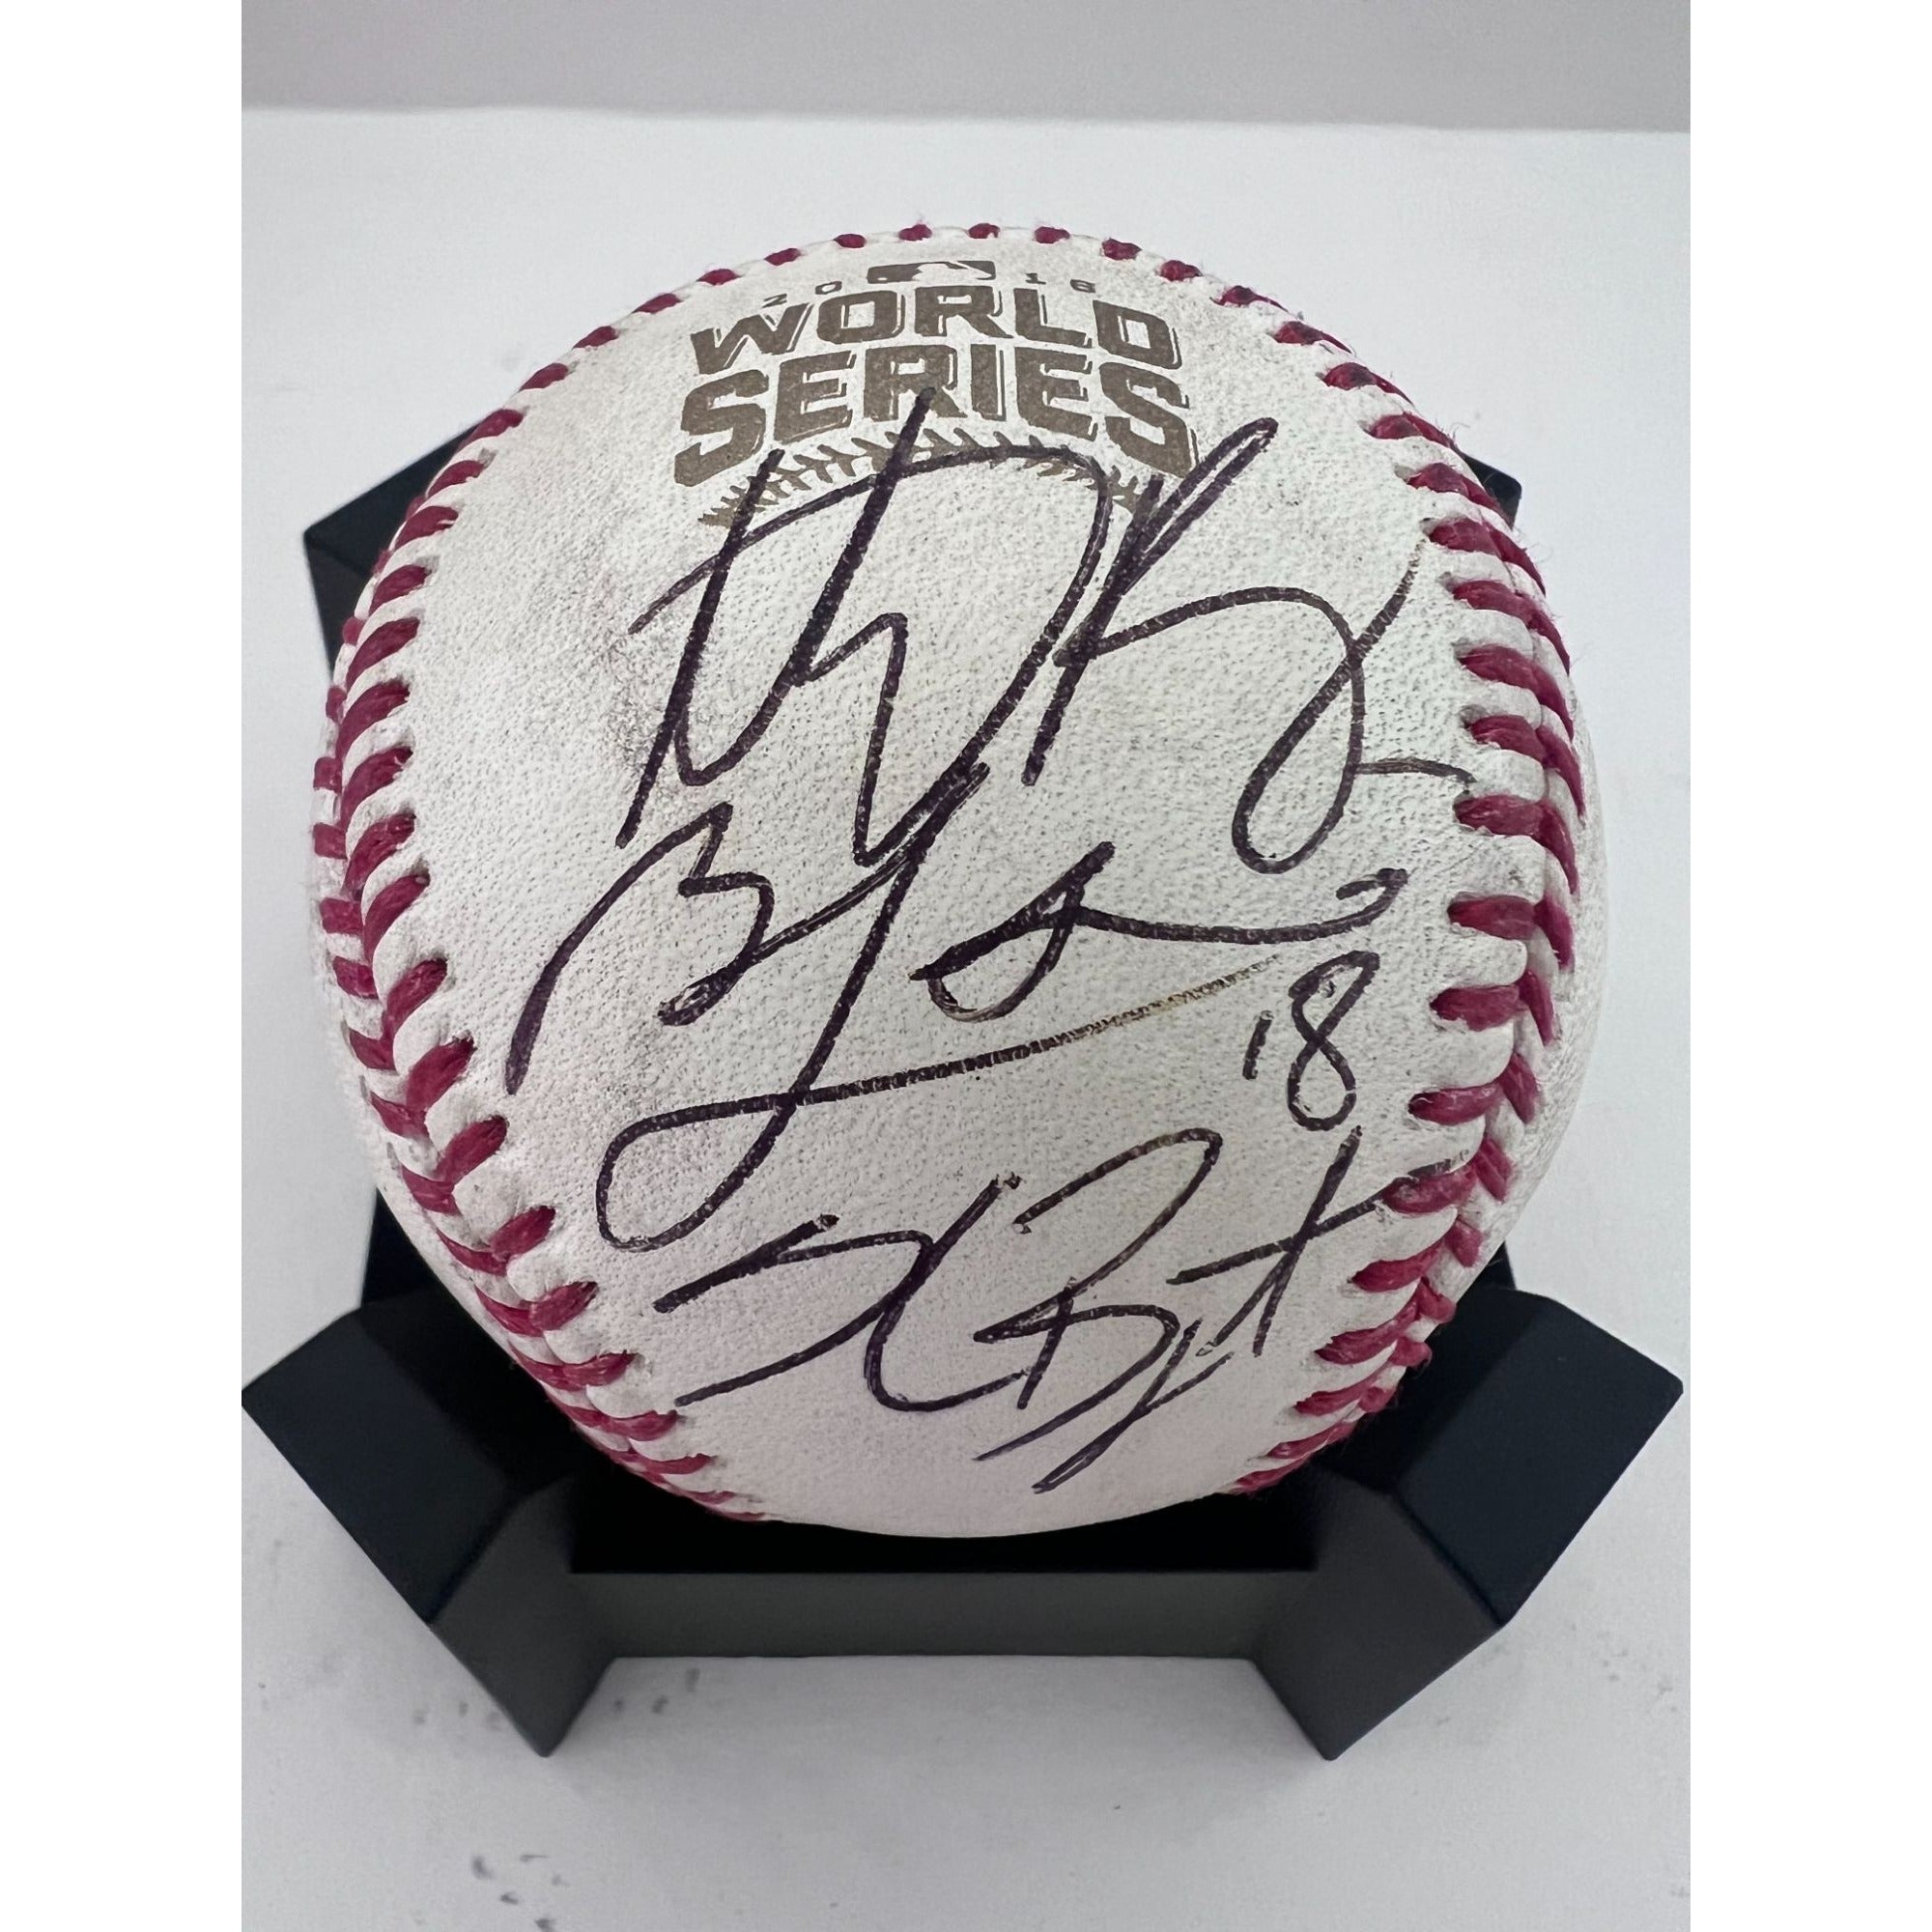 Anthony Rizzo Kris Bryant Ben Zobrist 2016 Rawlings World Series commemorative baseball signed with proof